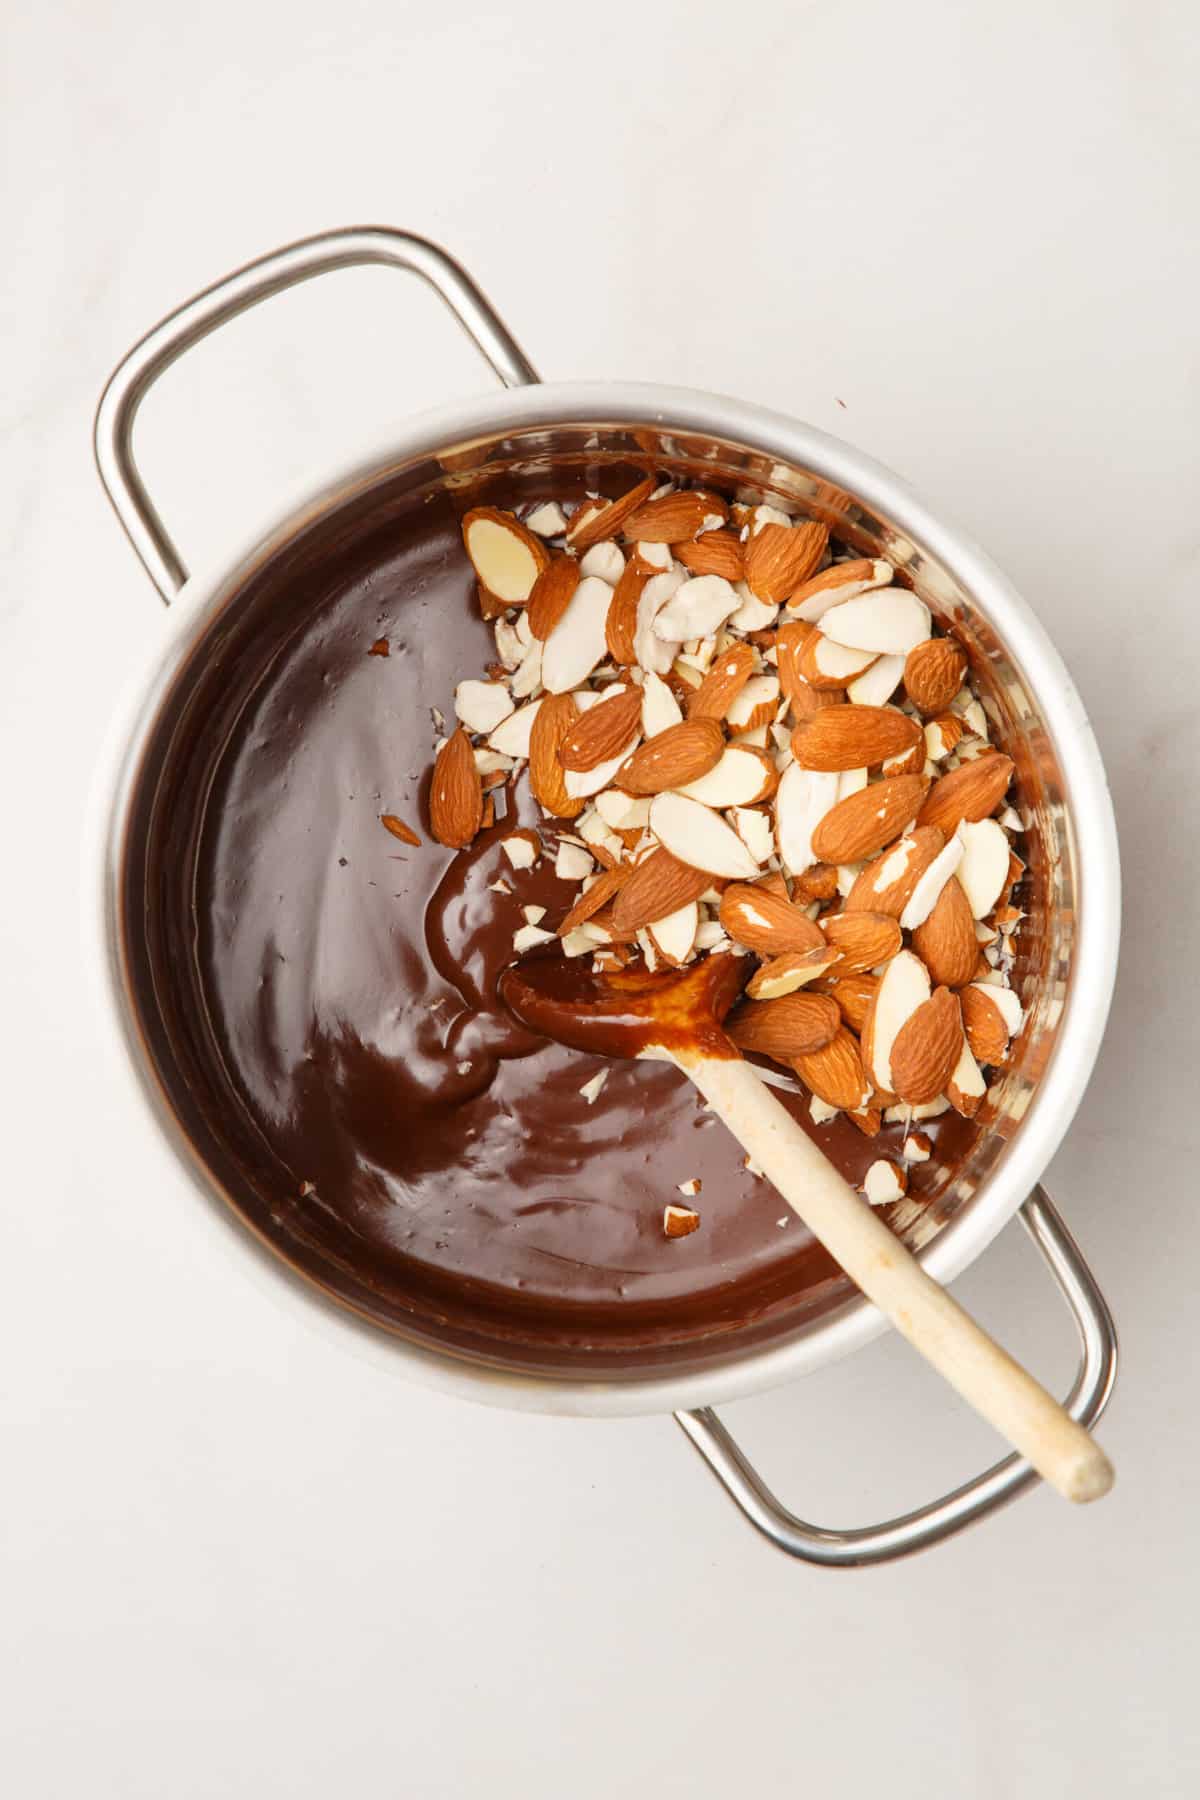 melted chocolate and sliced almonds in a stainless steel saucepan